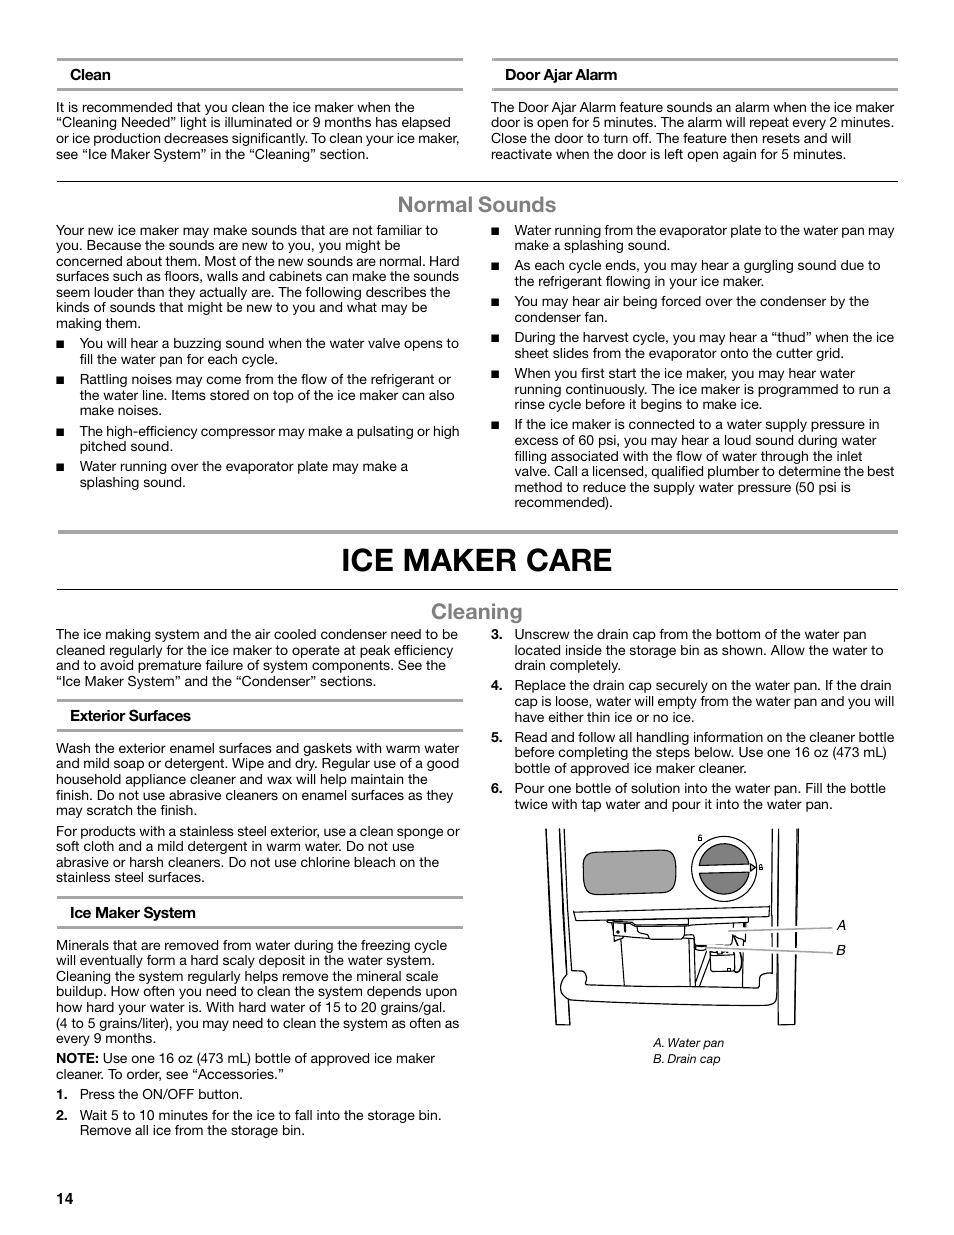 Ice maker care, Normal sounds, Cleaning | Whirlpool GI15NDXZS User ...